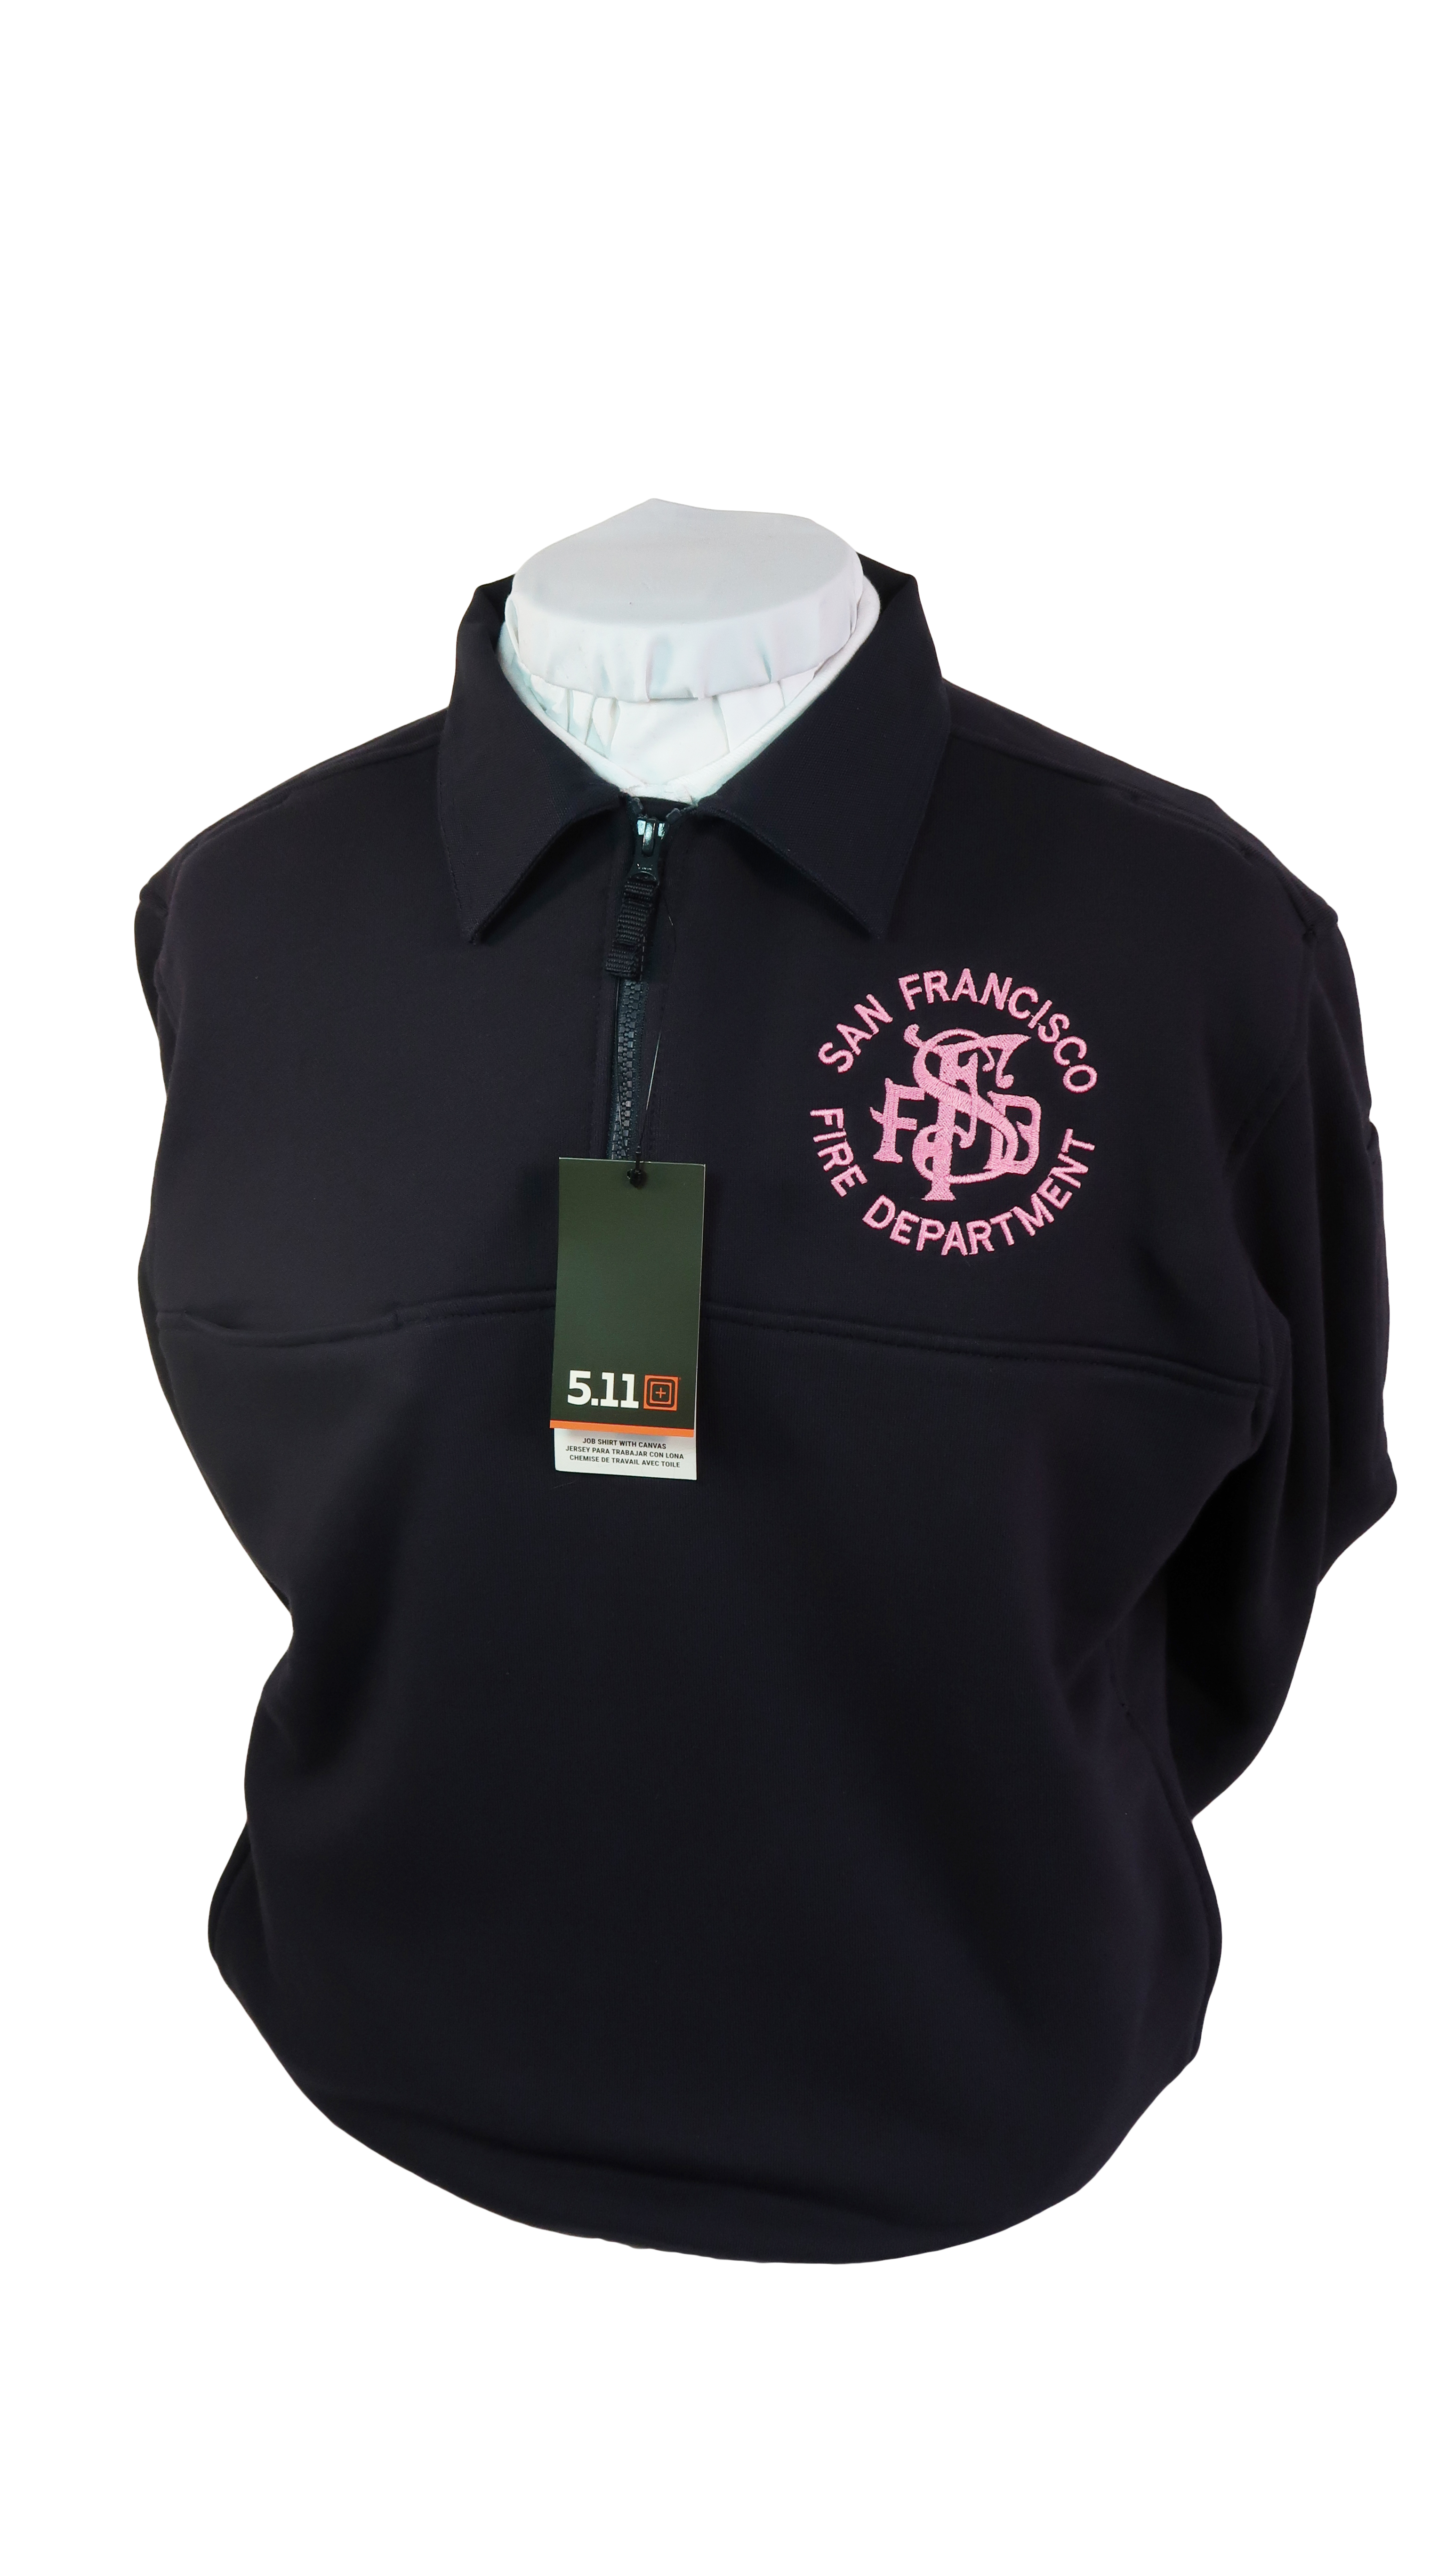 SFFD JOB SHIRT PINK ANTIQUE breast cancer embroidery logo